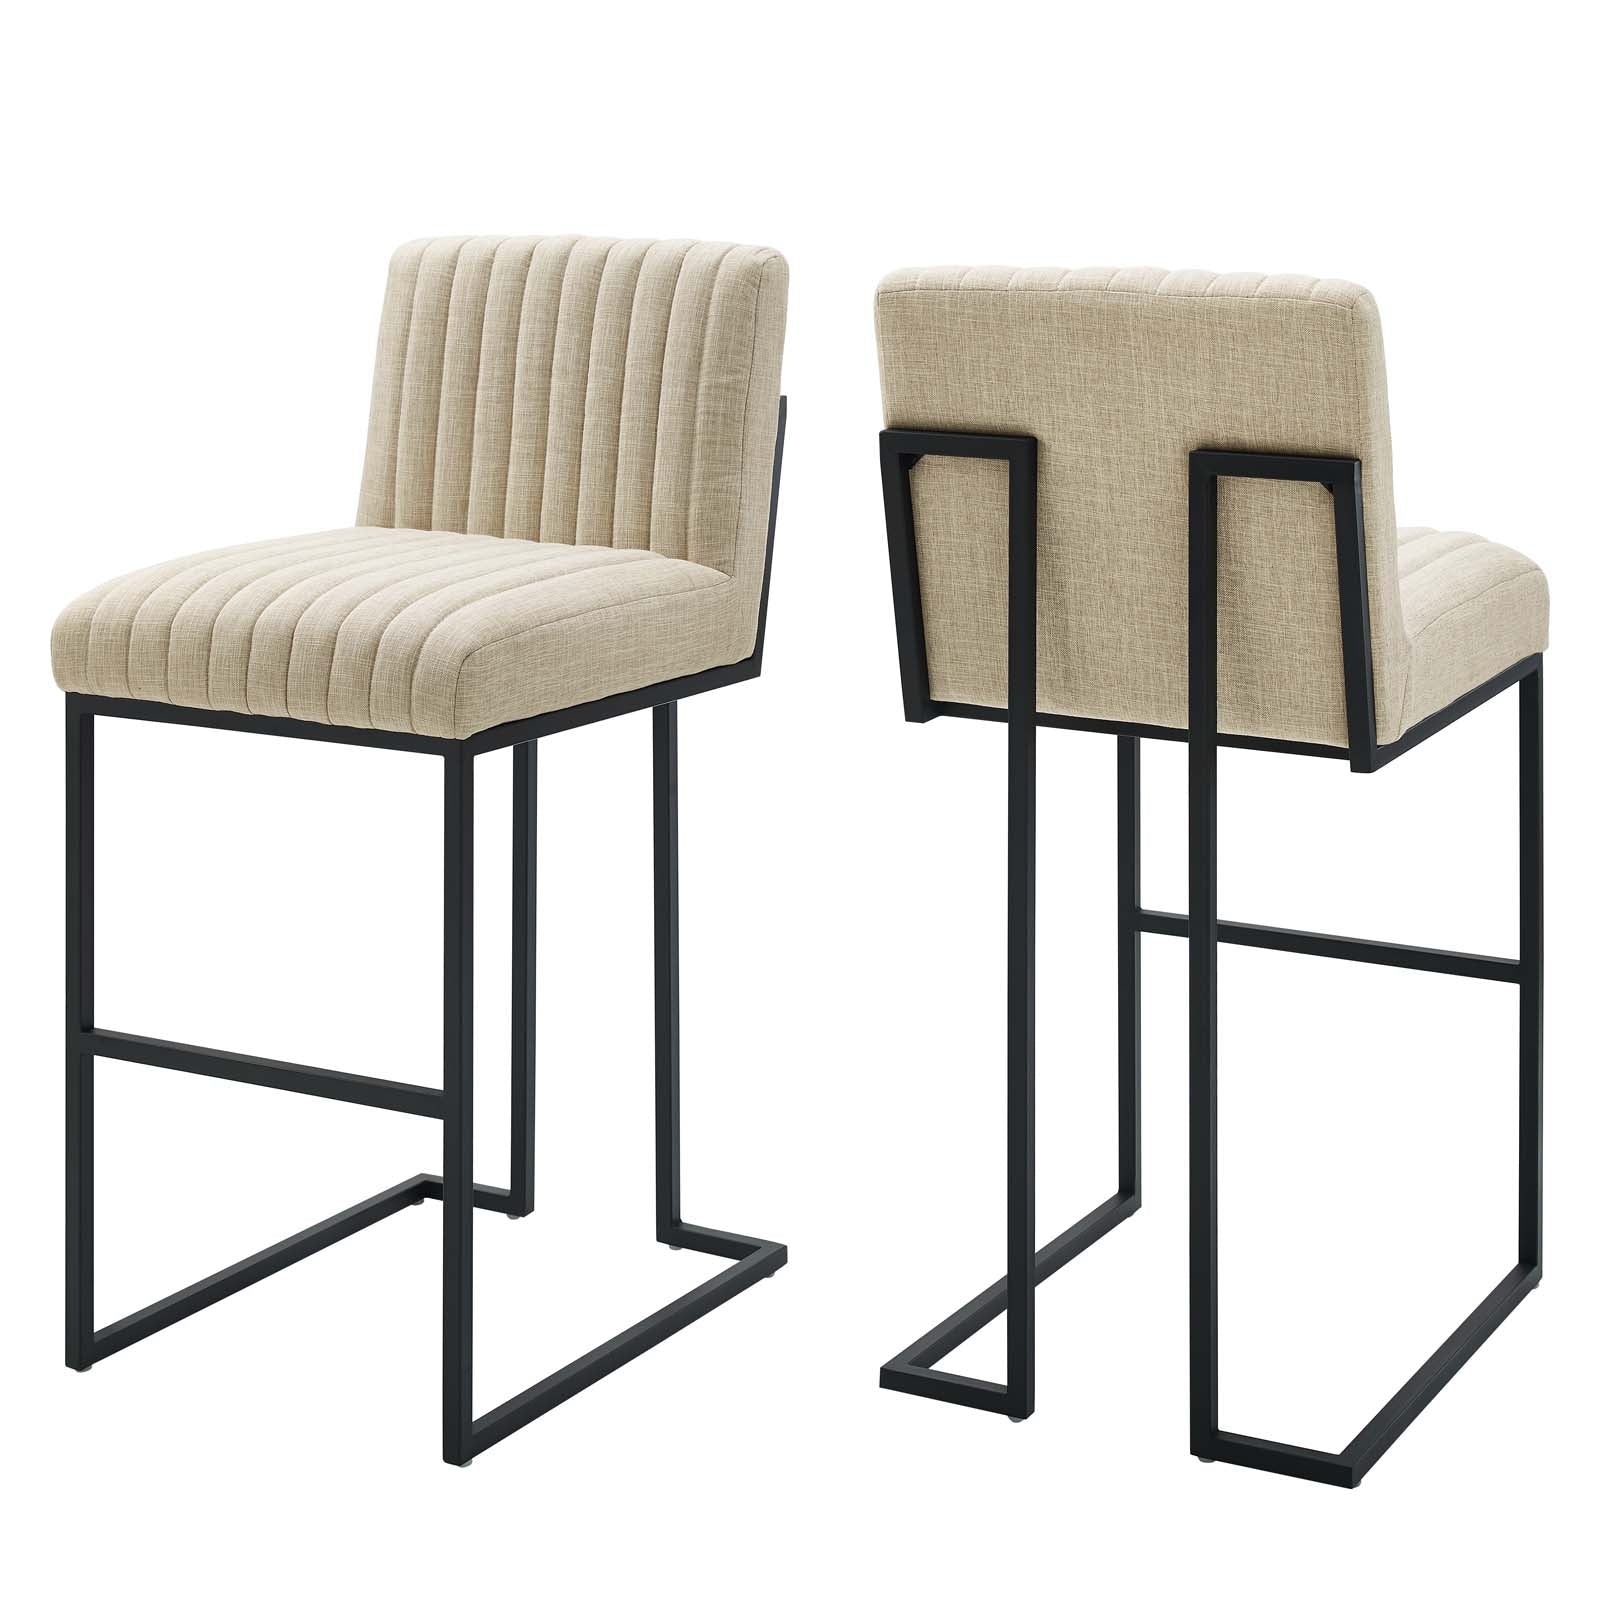 Modway Barstools - Indulge Channel Tufted Fabric Bar Stools Beige (Set of 2)